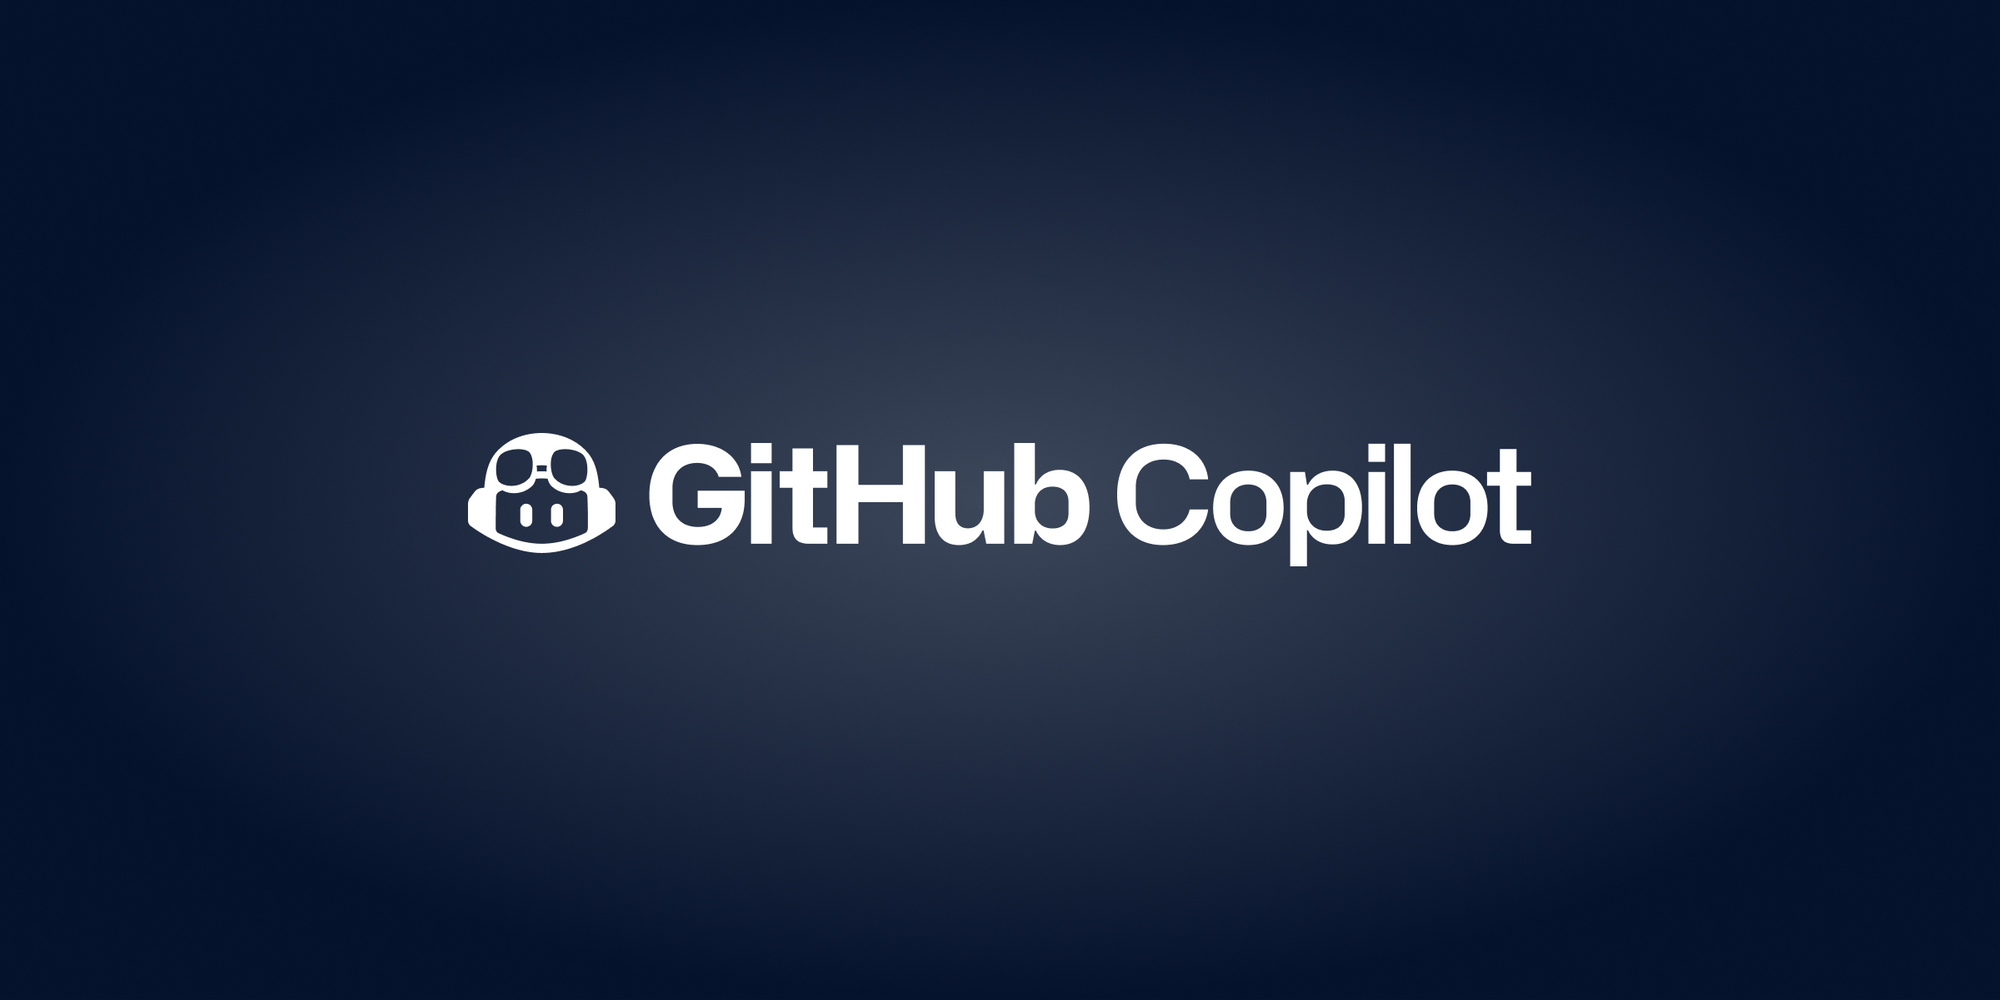 The GitHub Copilot Lawsuit Threatens Open Source and Human Progress